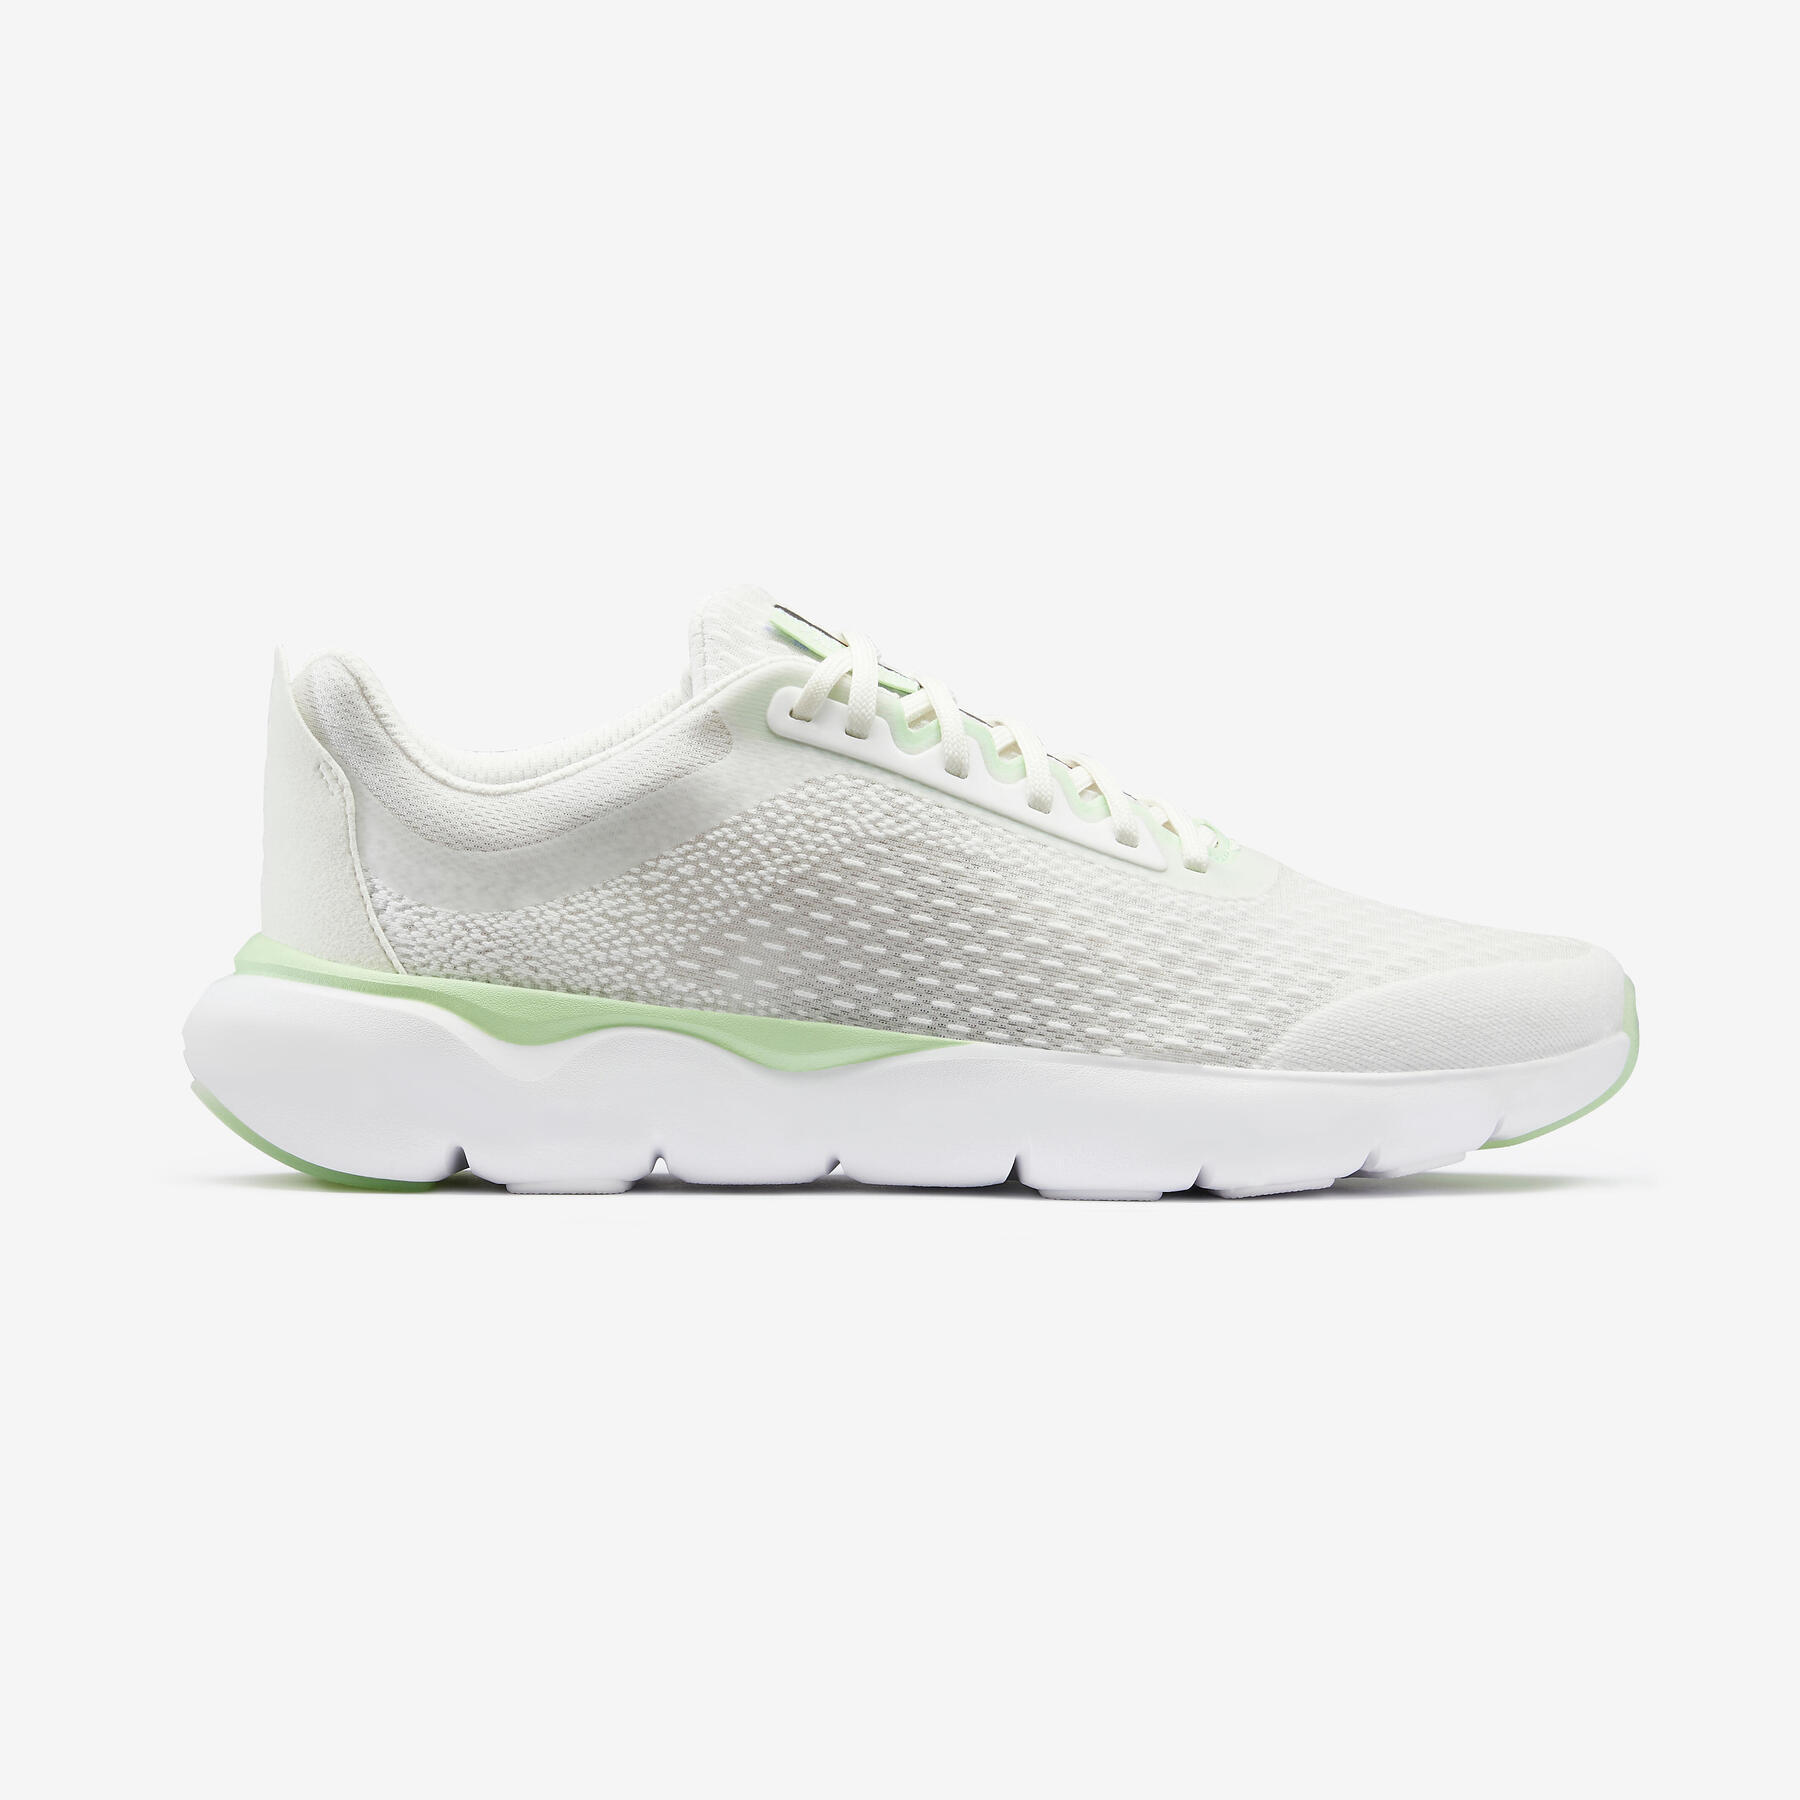 Refurbished Mens running shoes - Light Green and Off-White - A Grade 3/7